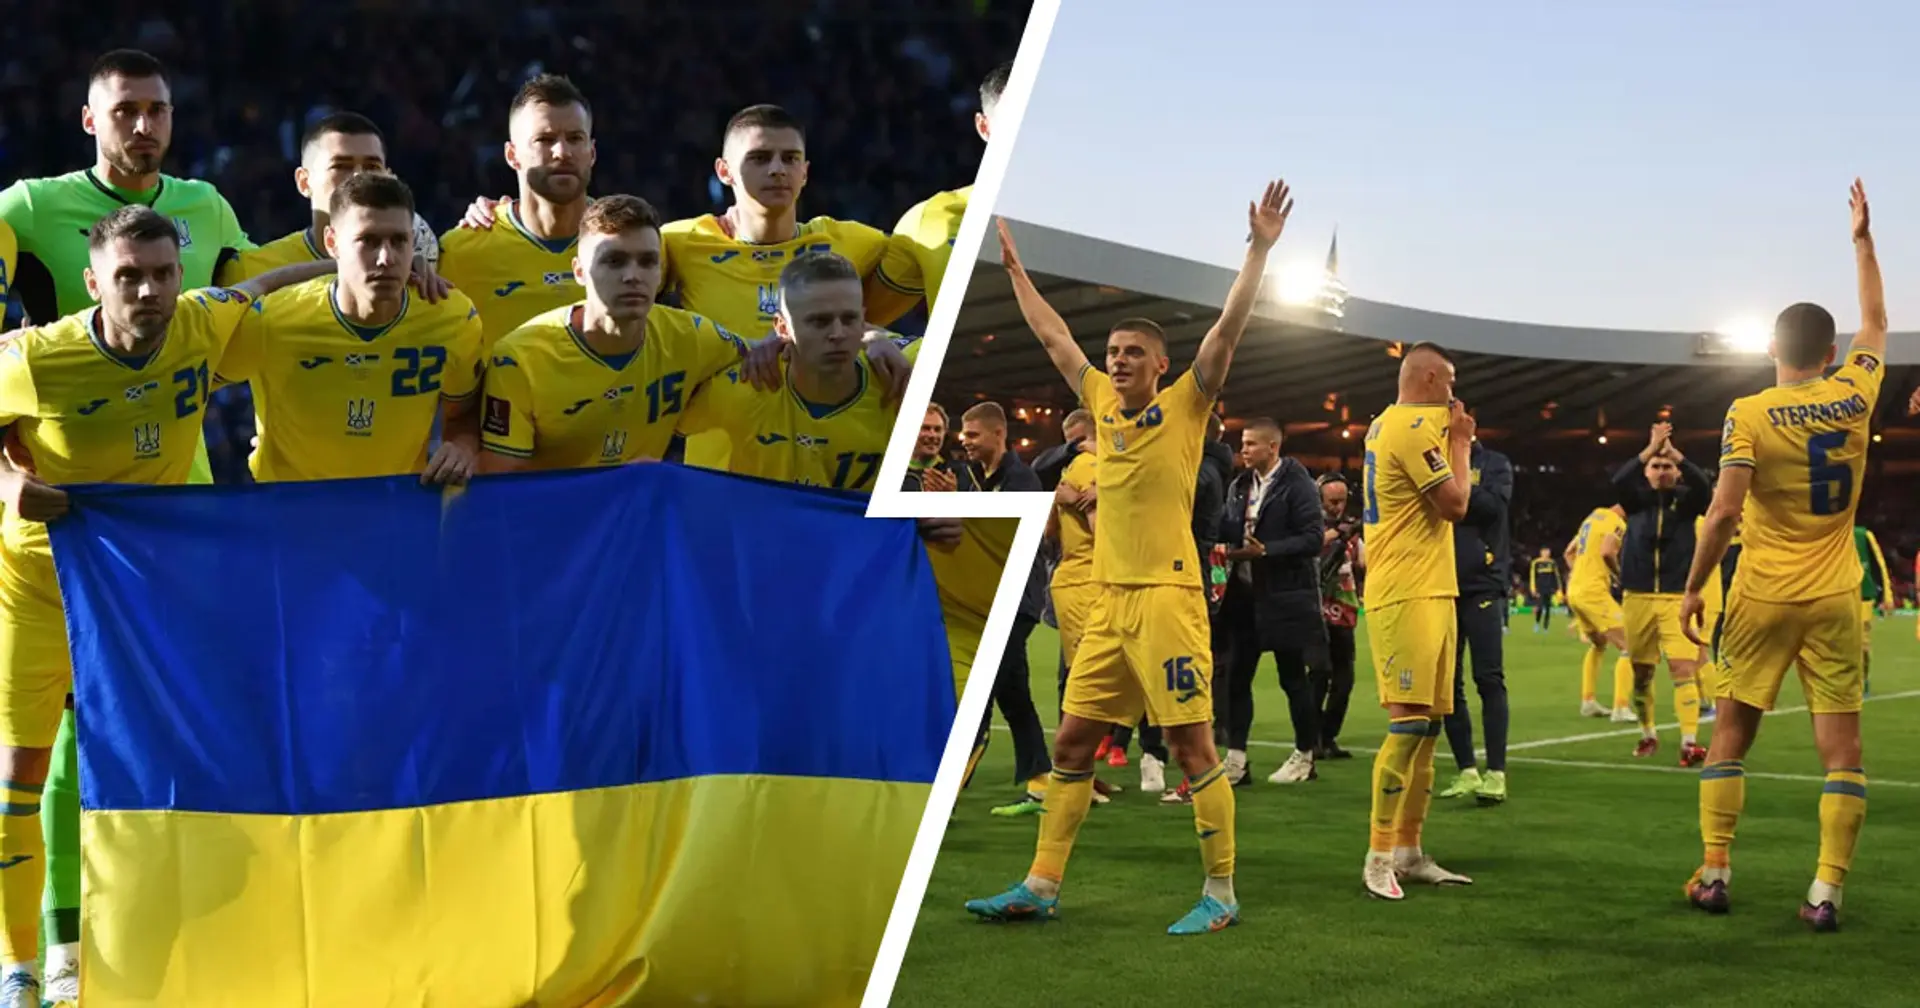 OFFICIAL: Ukraine qualifies for World Cup qualifier playoff final after win over Scotland